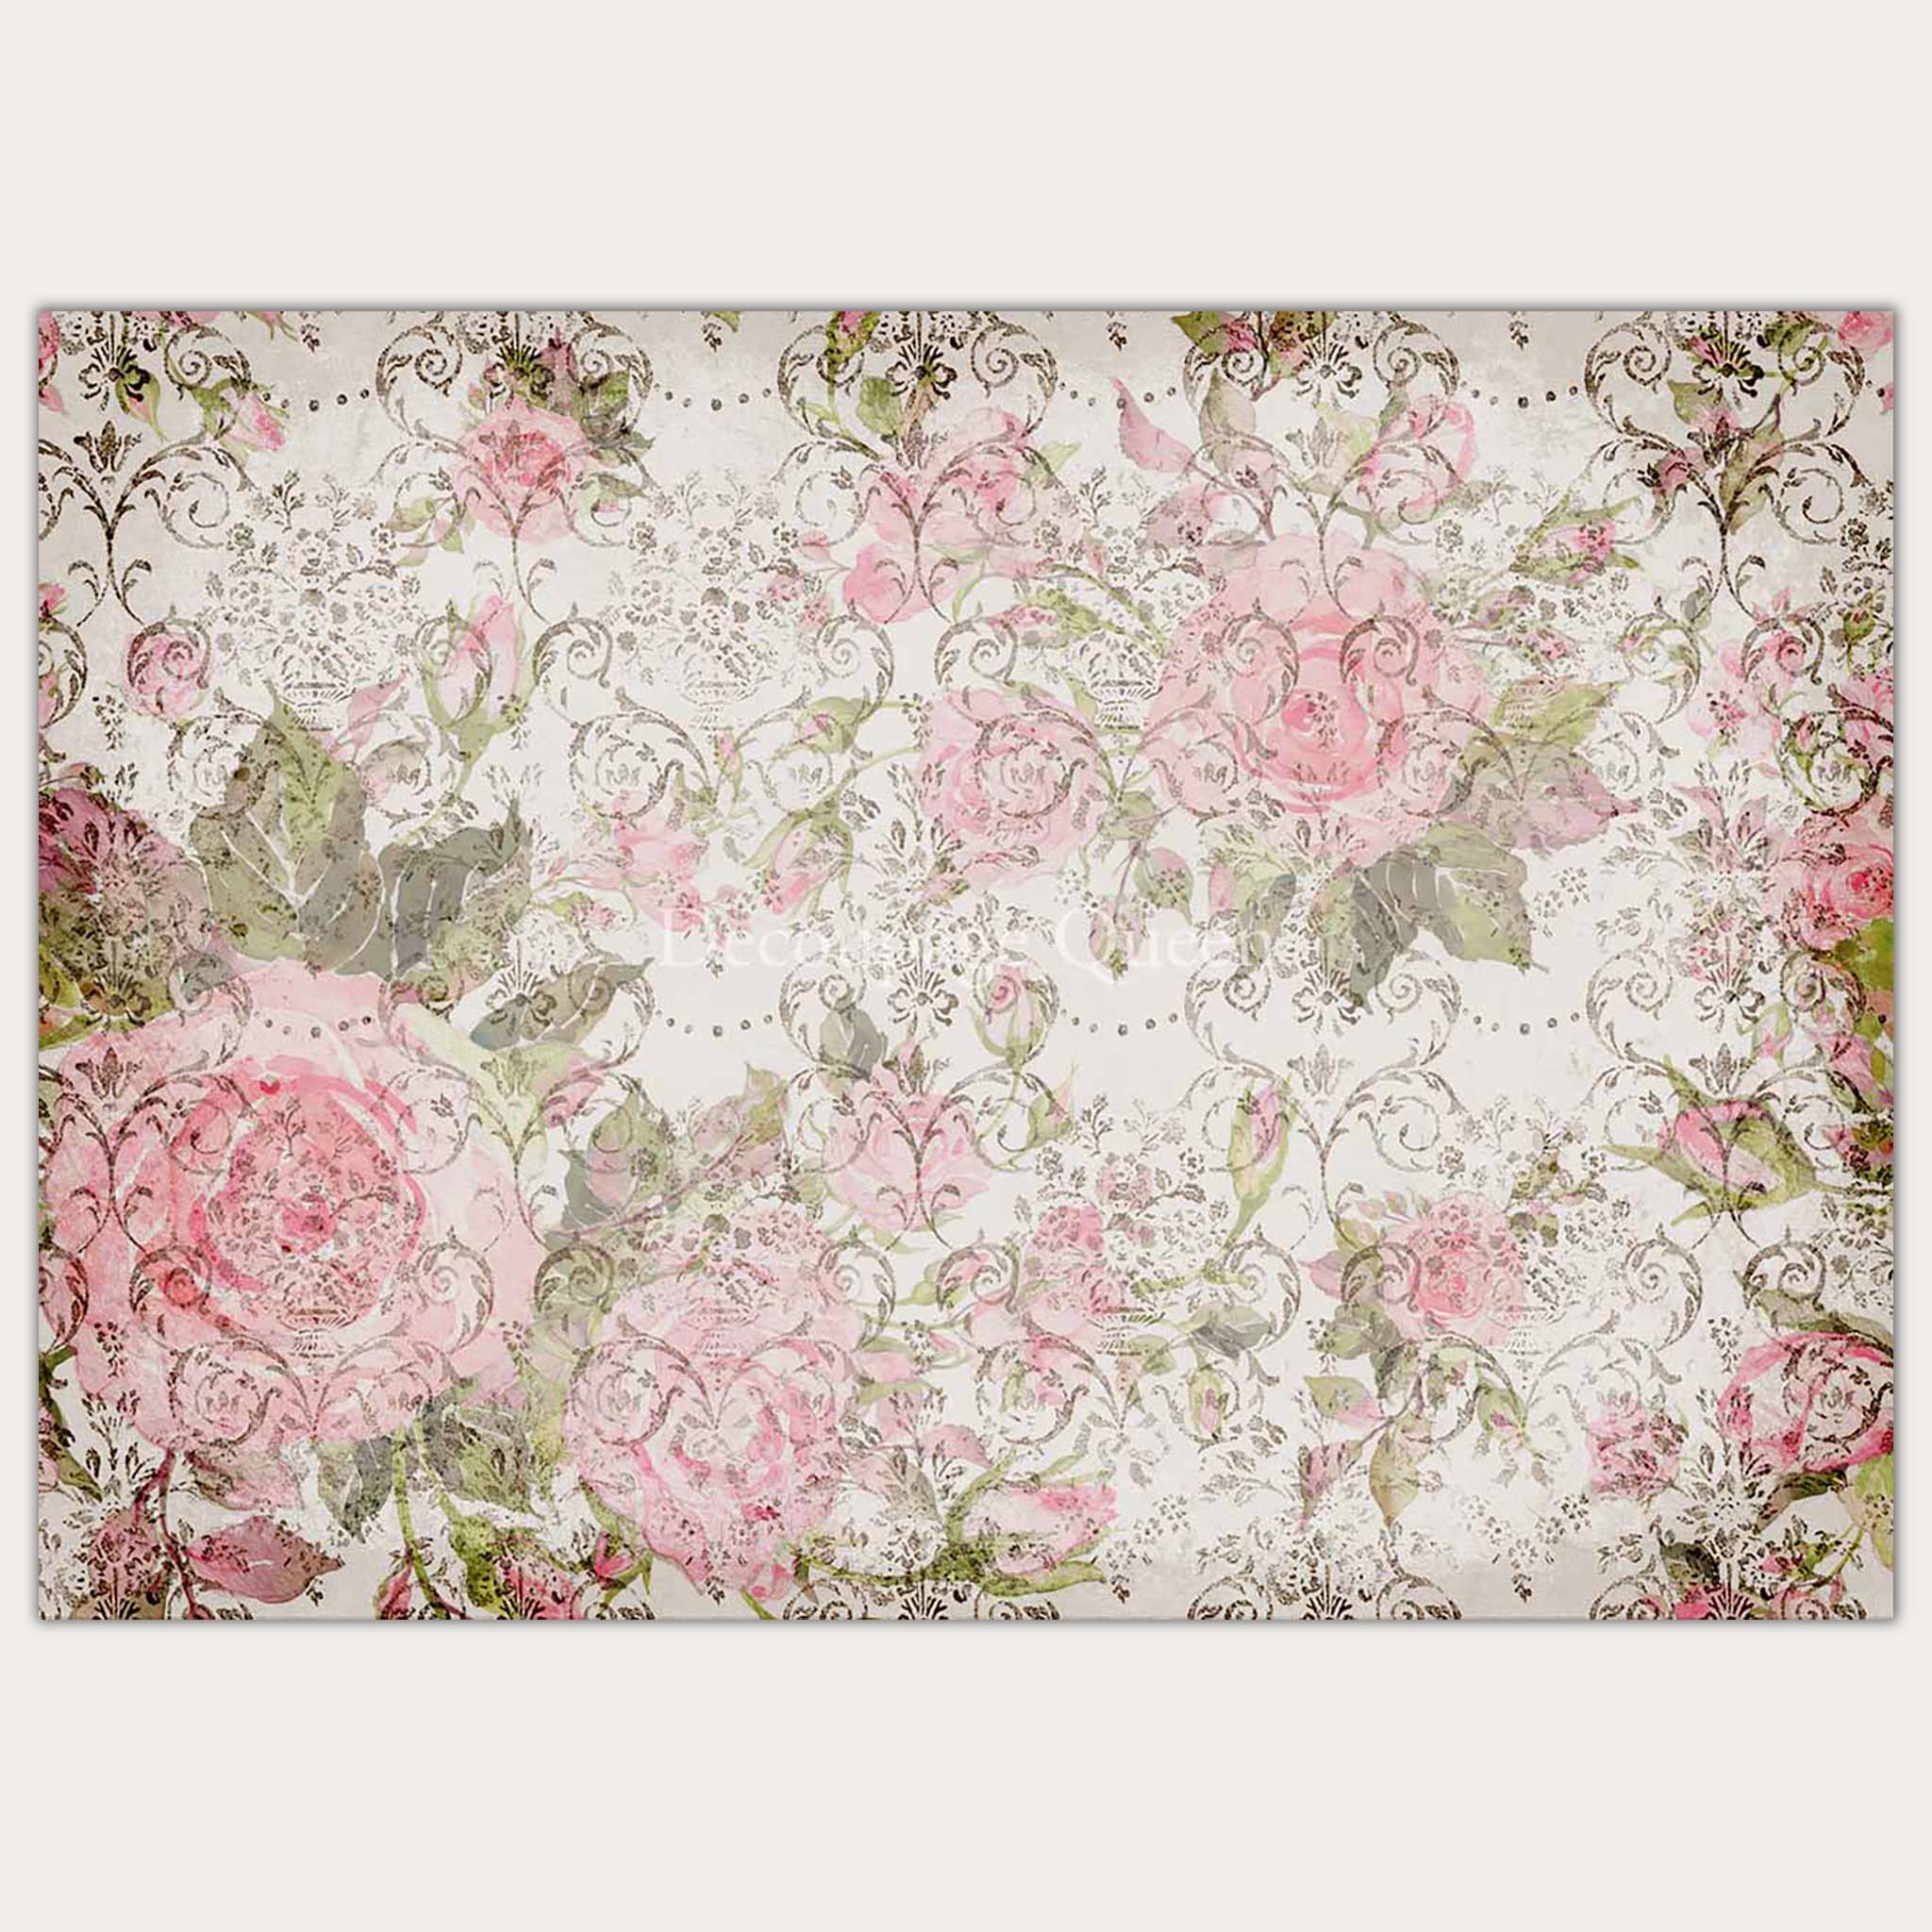 A3 rice paper design that features a repeating dark scroll pattern overlayed on large faded pink roses. White borders are on the top and bottom.